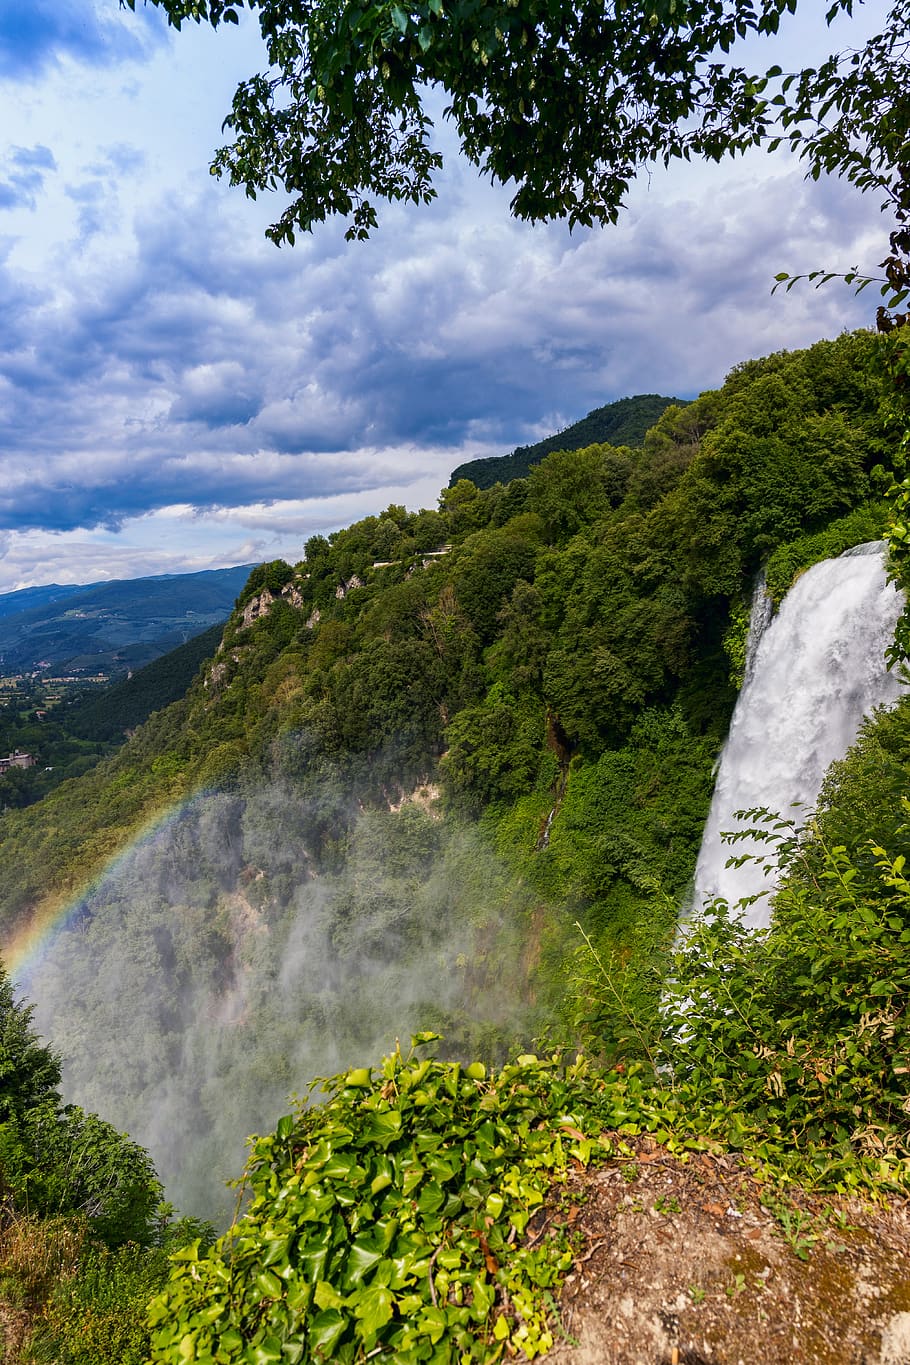 umbria, waterfall, italy, landscape, nature, trees, water, clouds, beauty in nature, plant